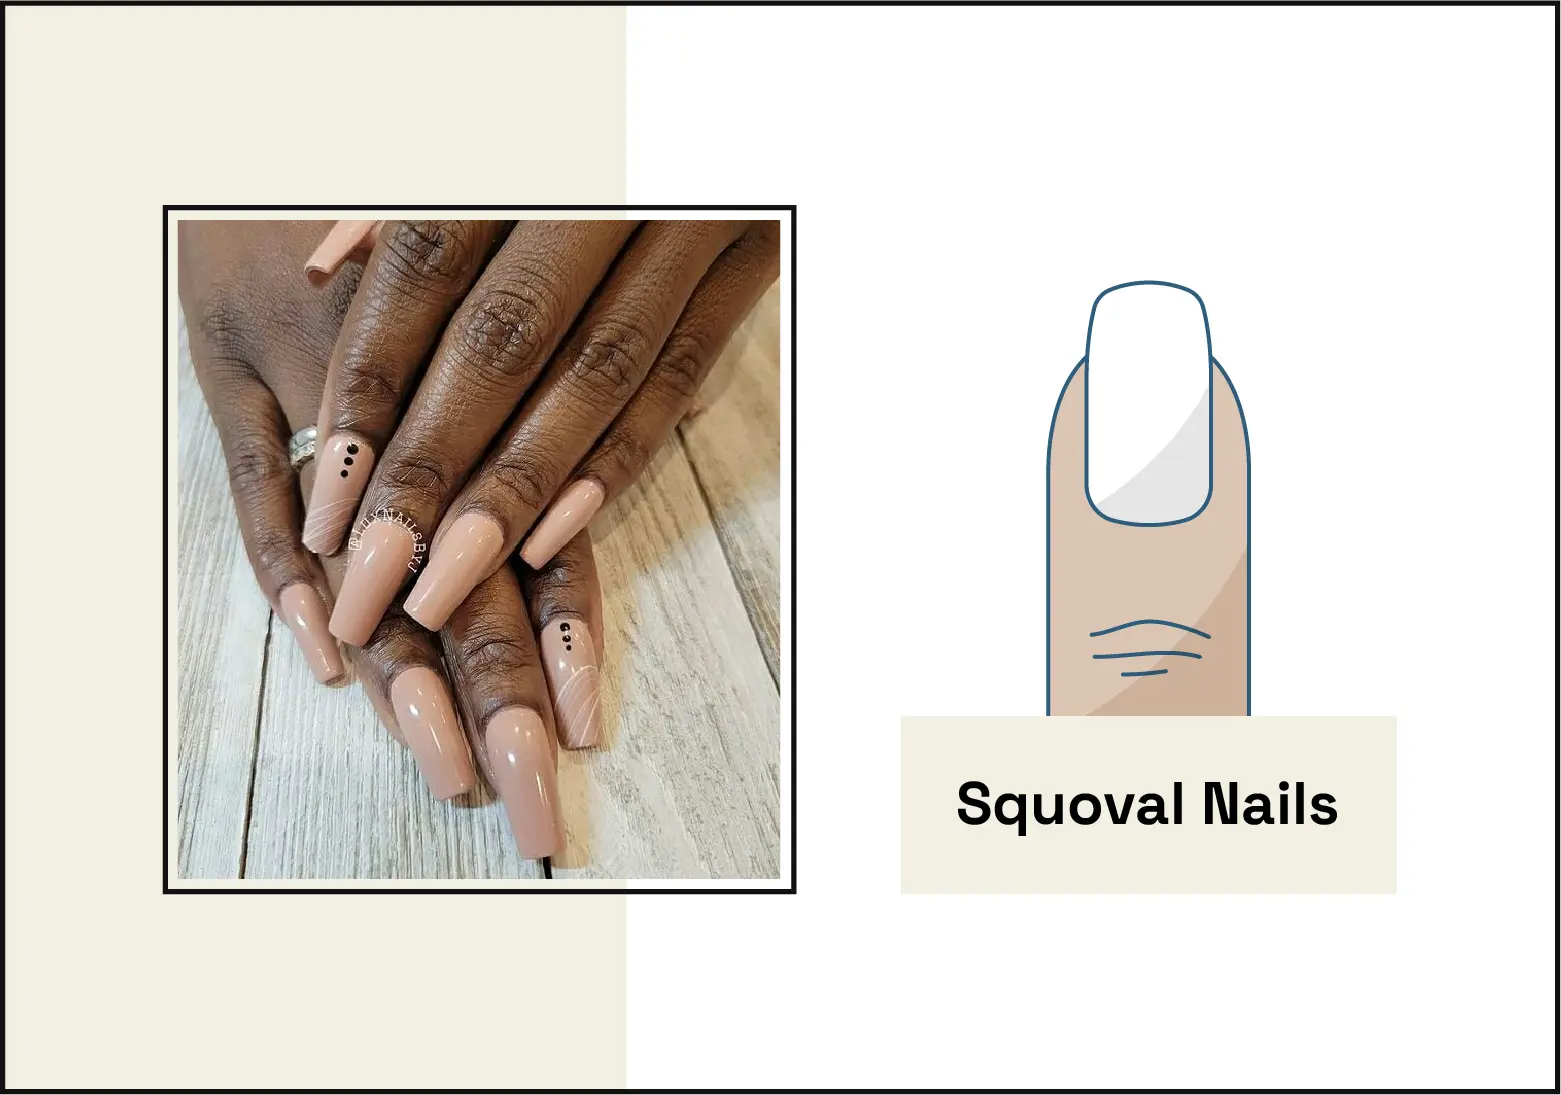 photo of manicure with nude squoval-shaped nails on the left, illustration of the squoval nail shape on the right